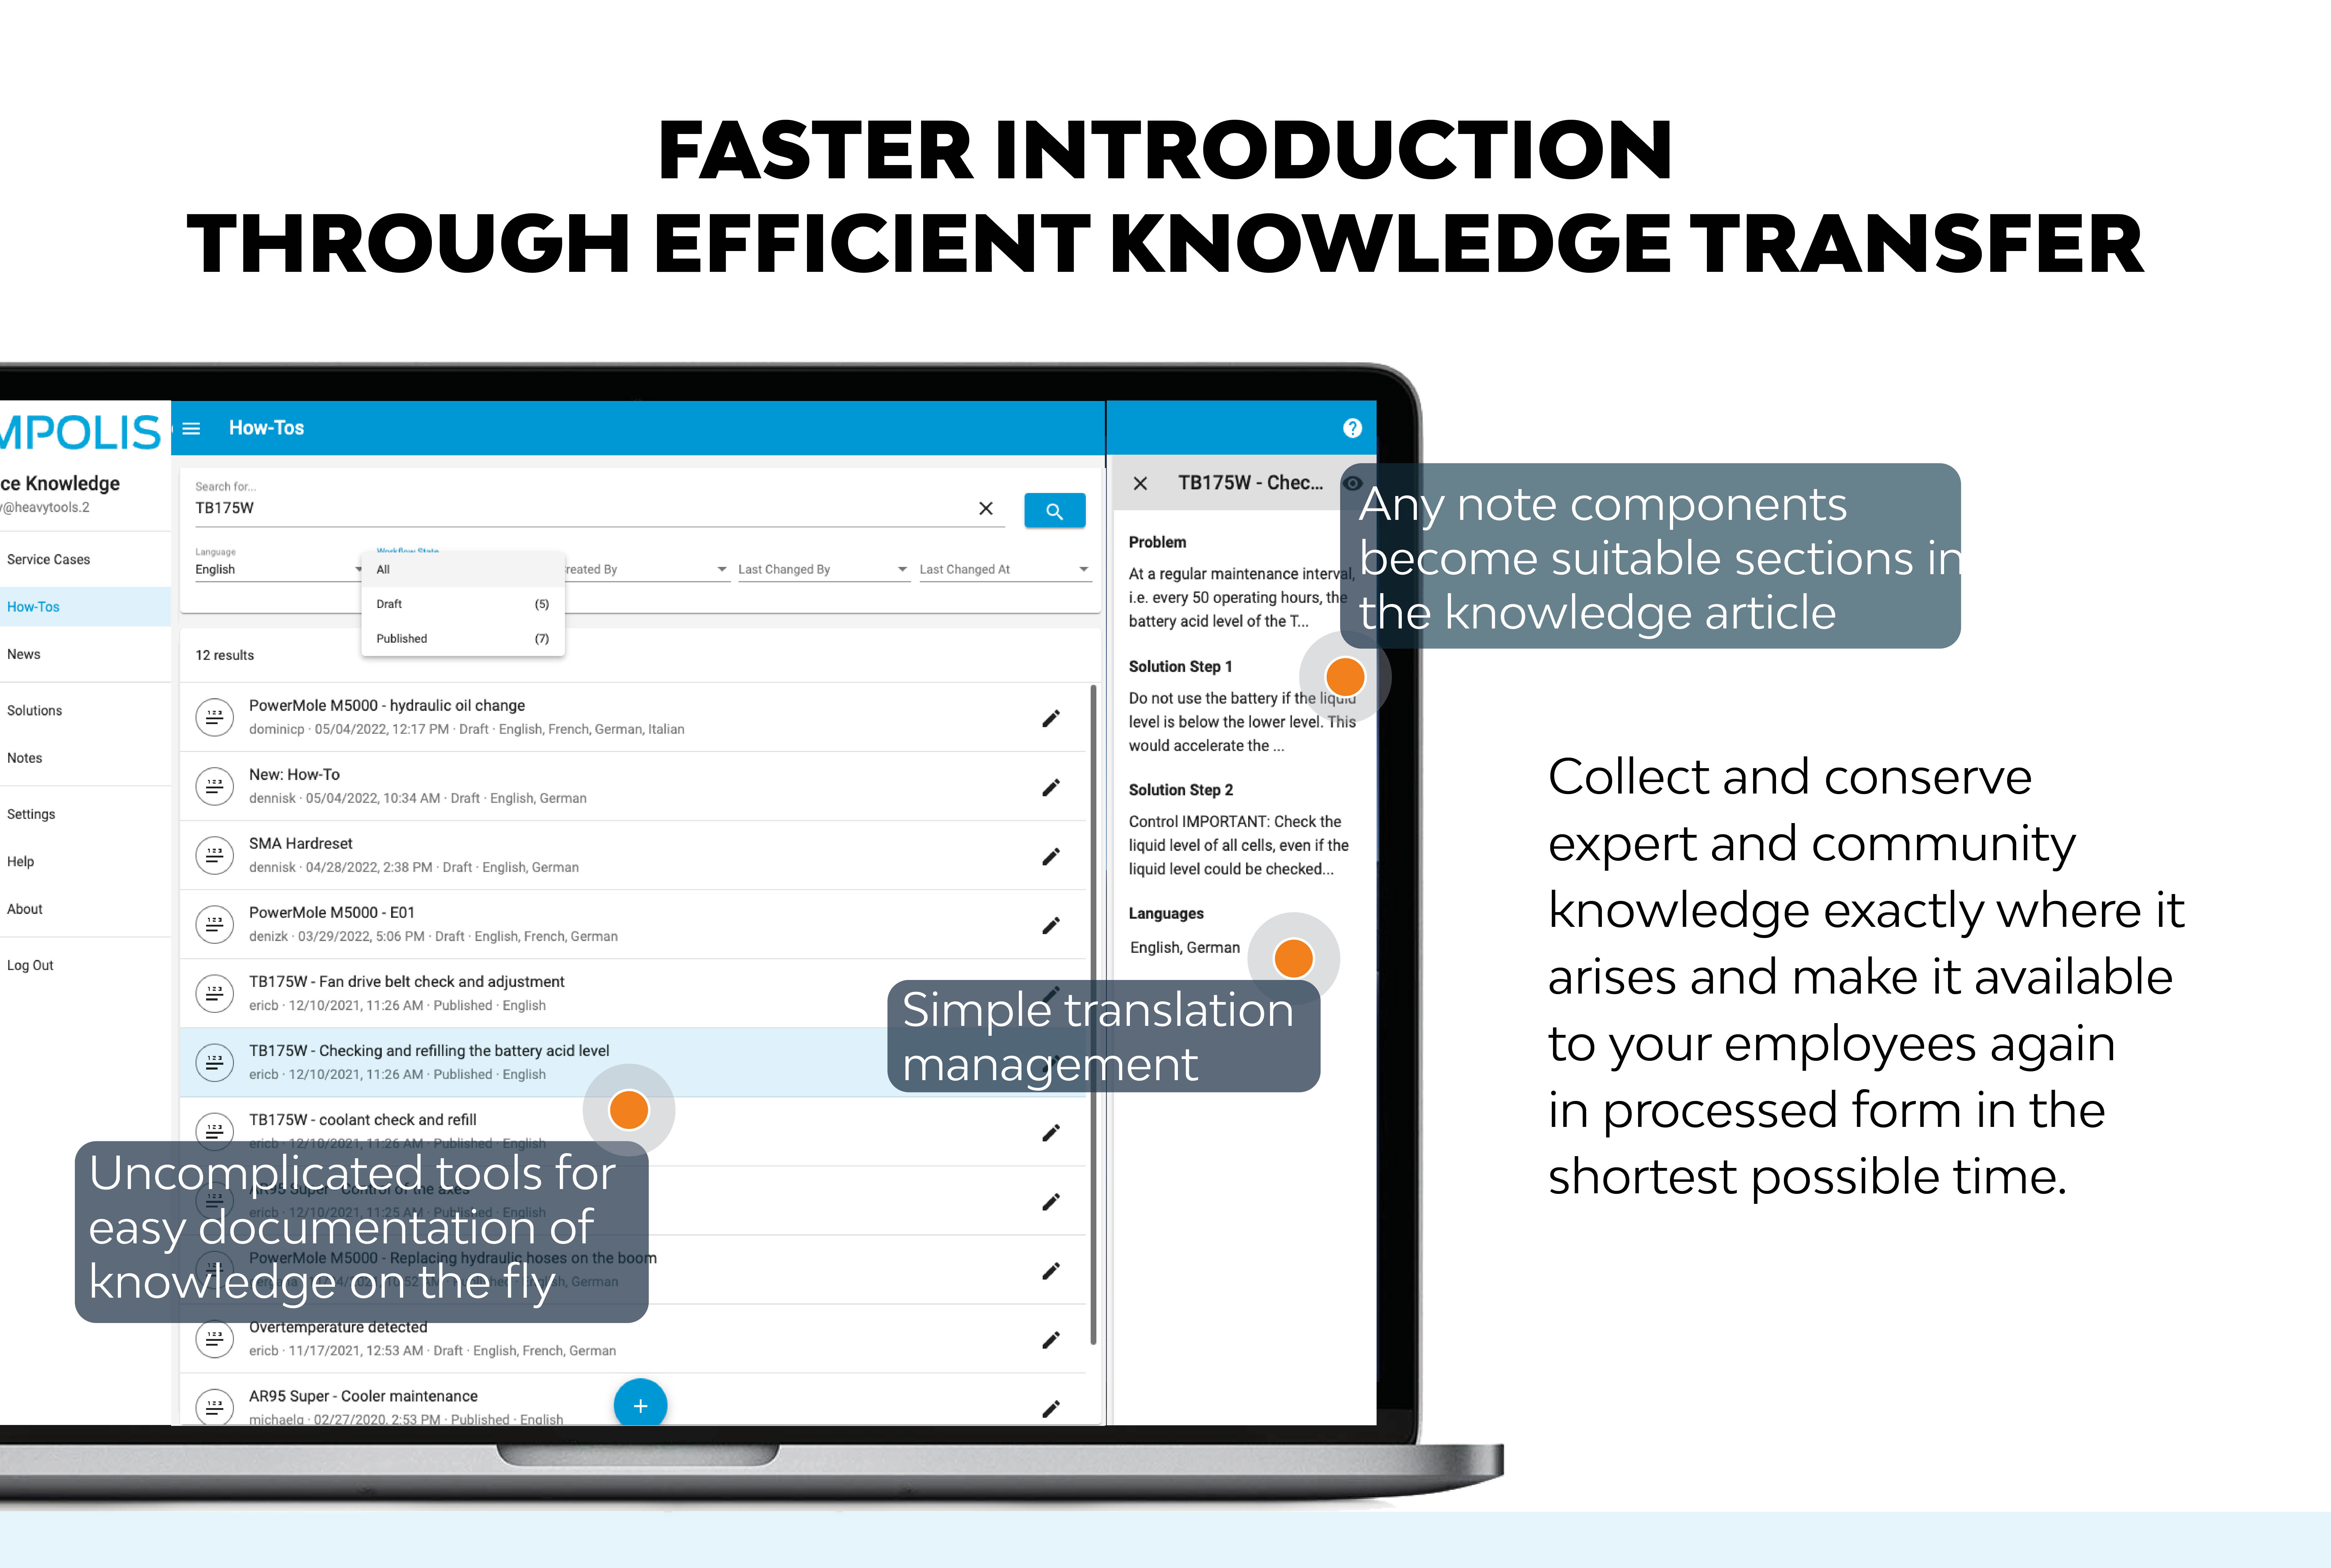 Faster onboarding through efficient knowledge transfer